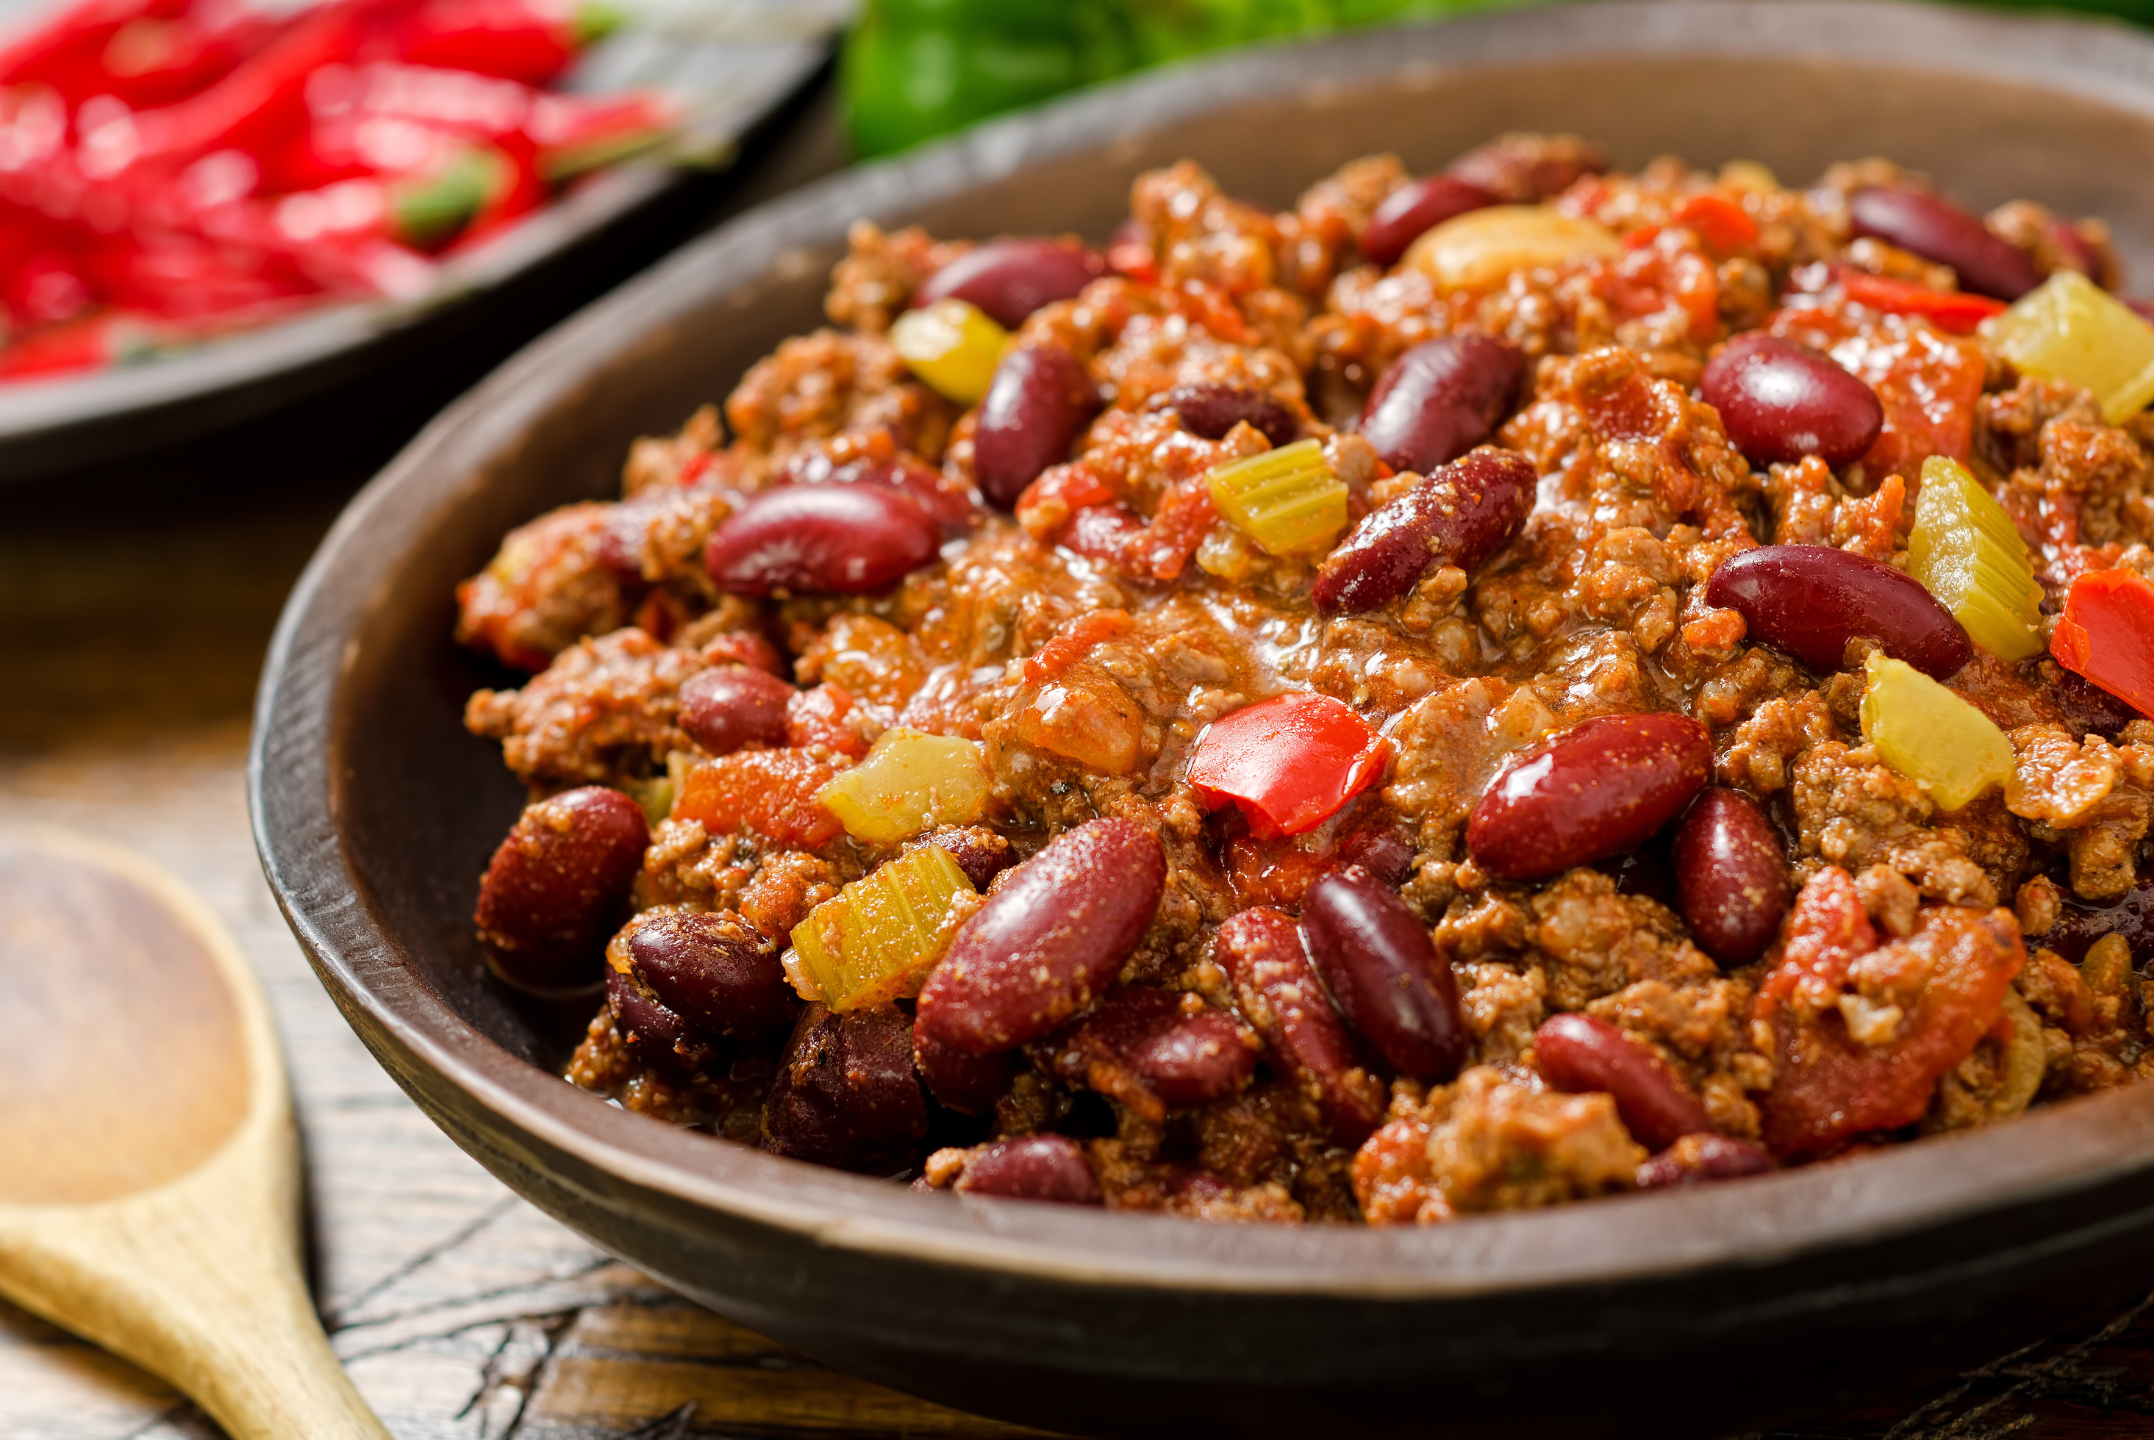 Warm Up With This Healthy Chili Con Carne Recipe